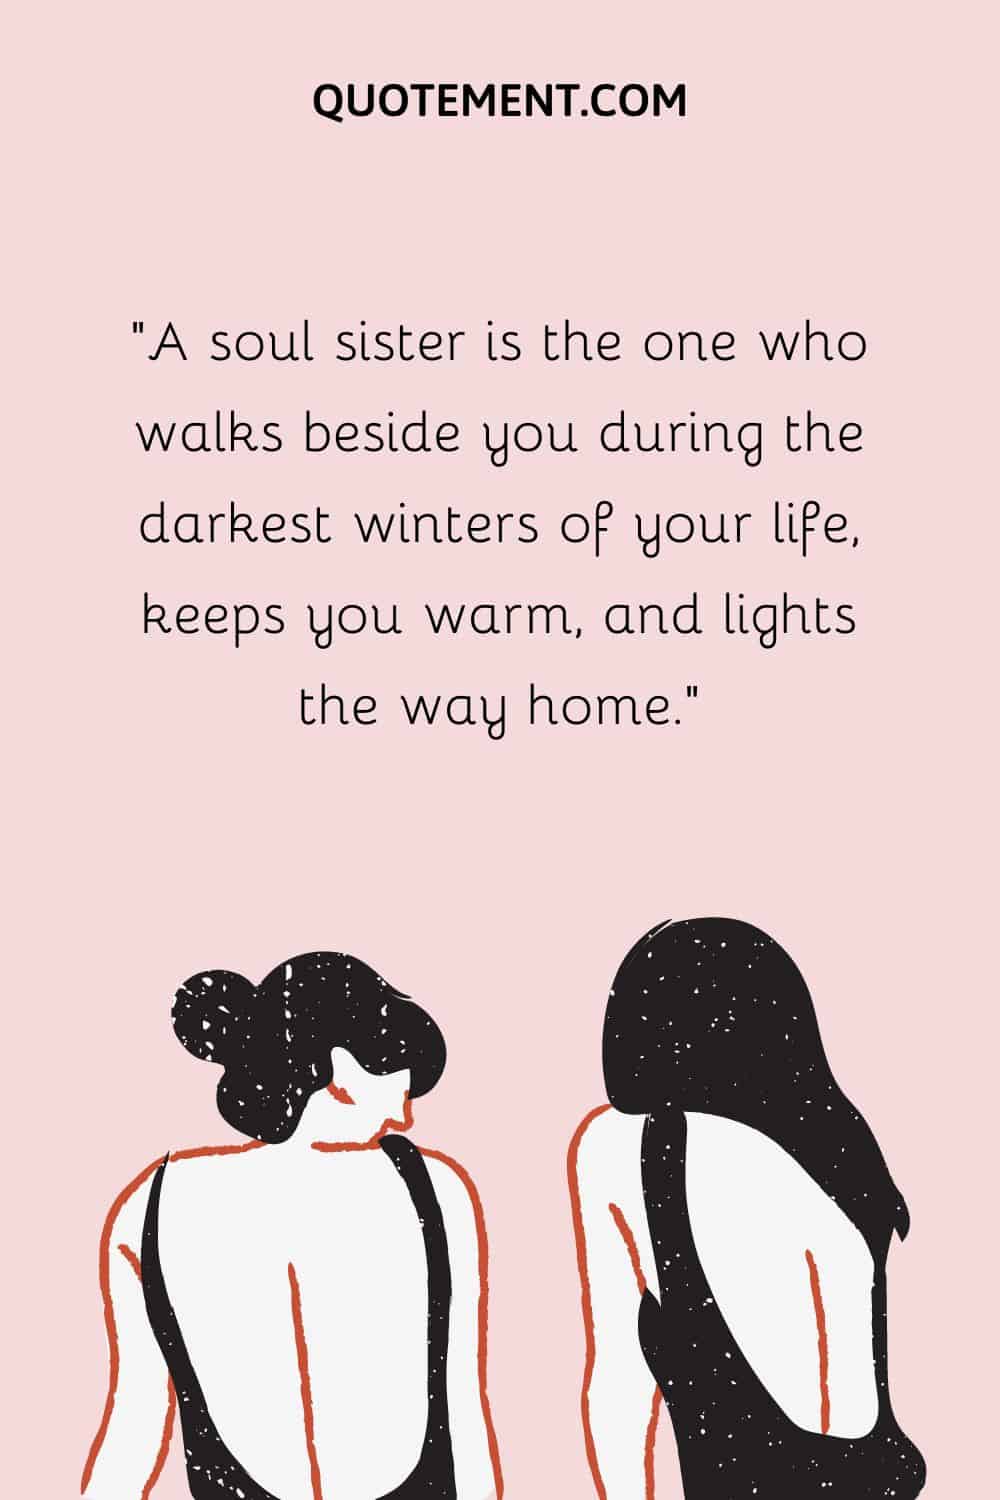 A soul sister is the one who walks beside you